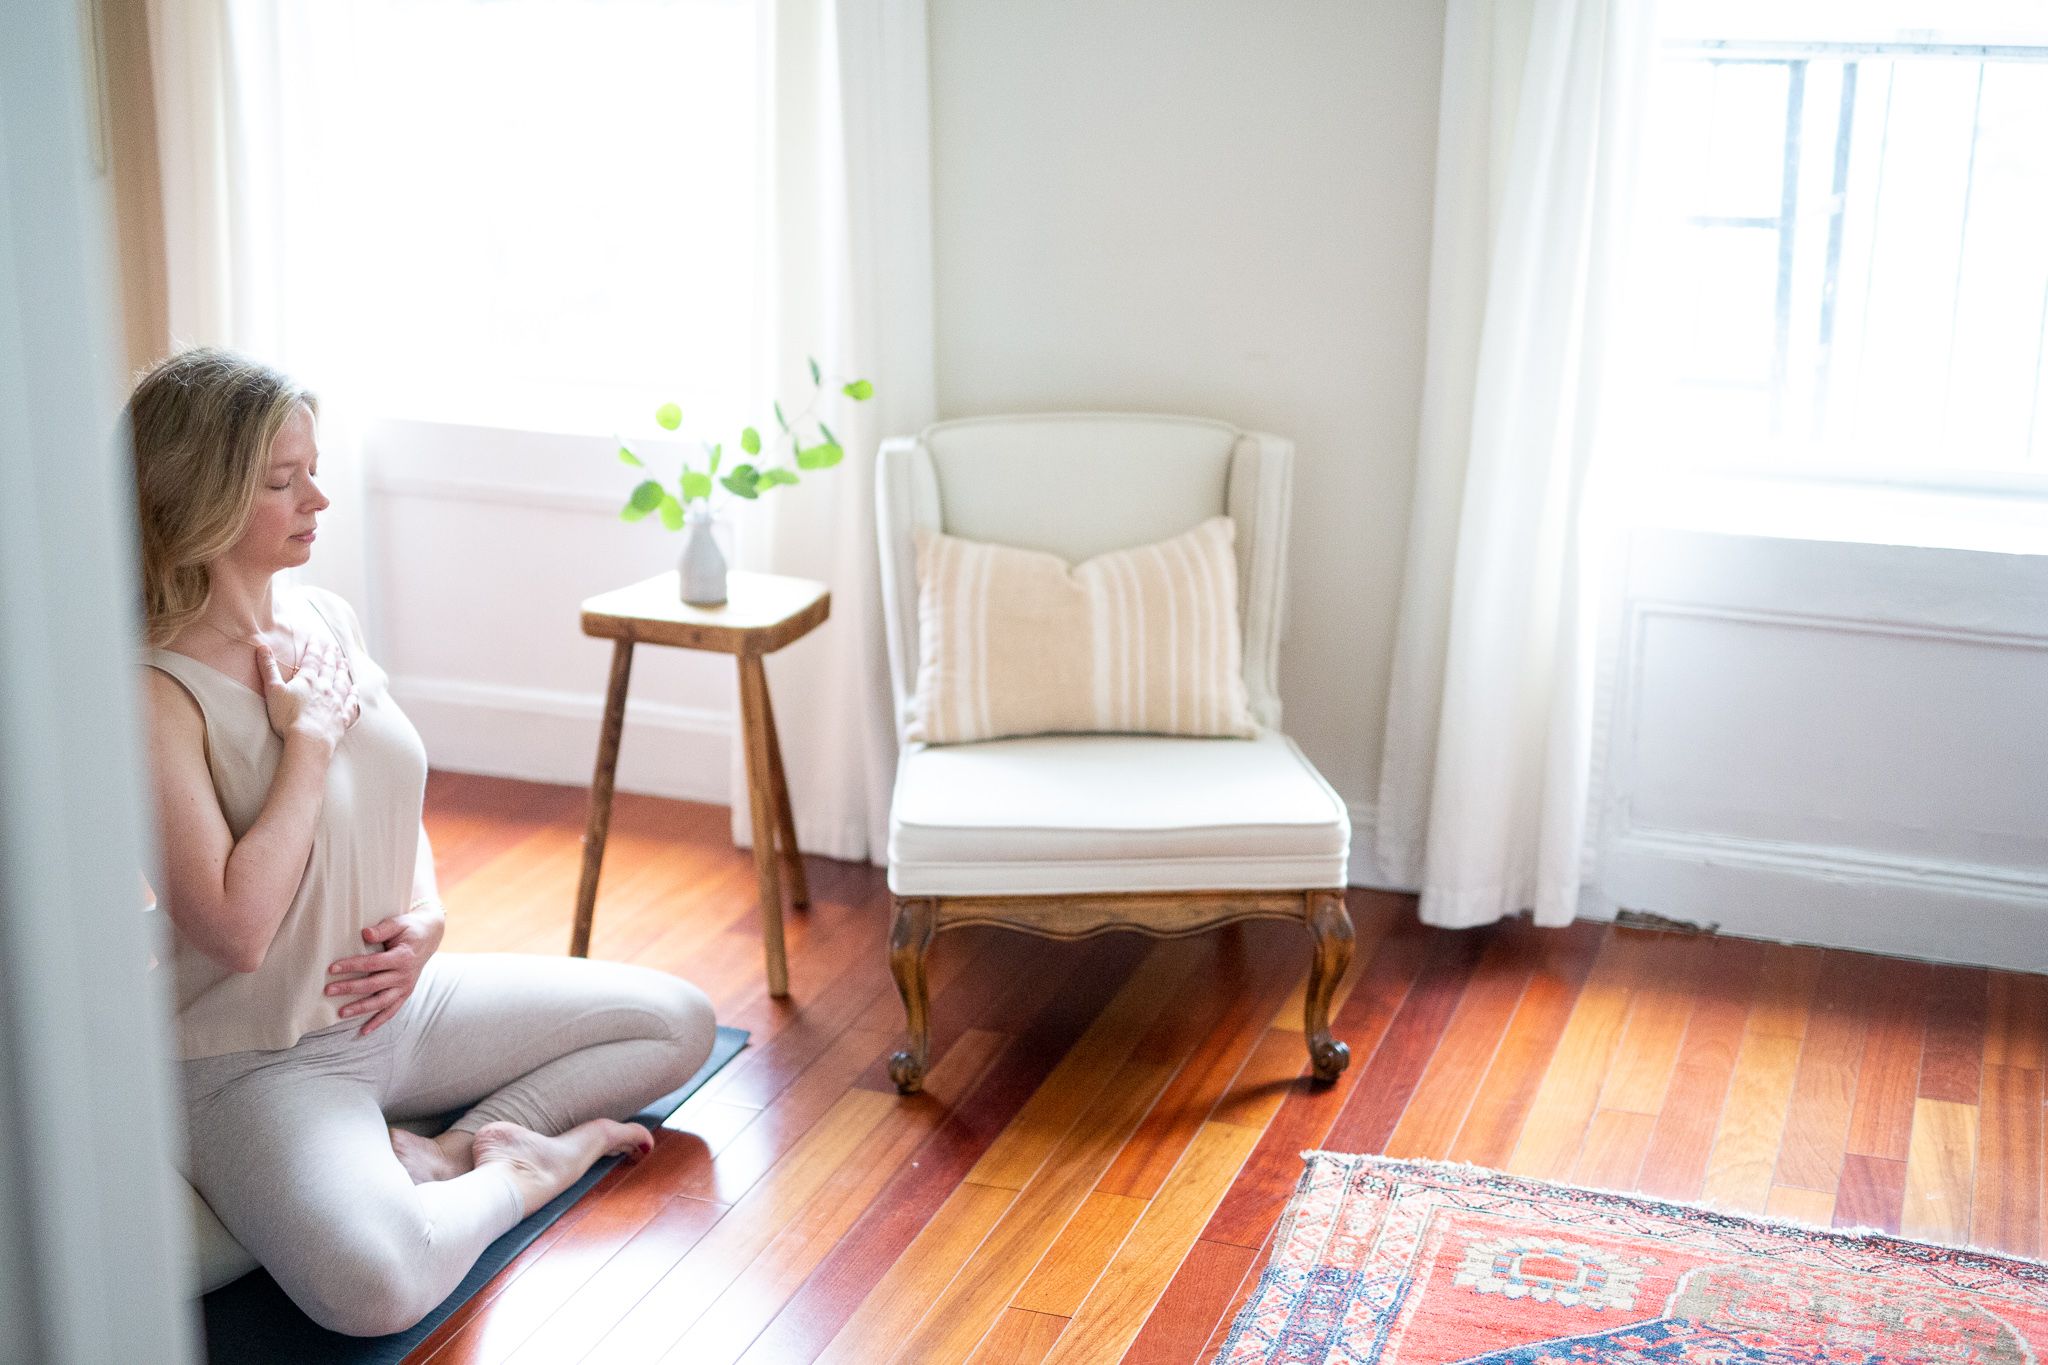 woman meditation wearing cream colors in room with chair and small stool with greenery in a vase